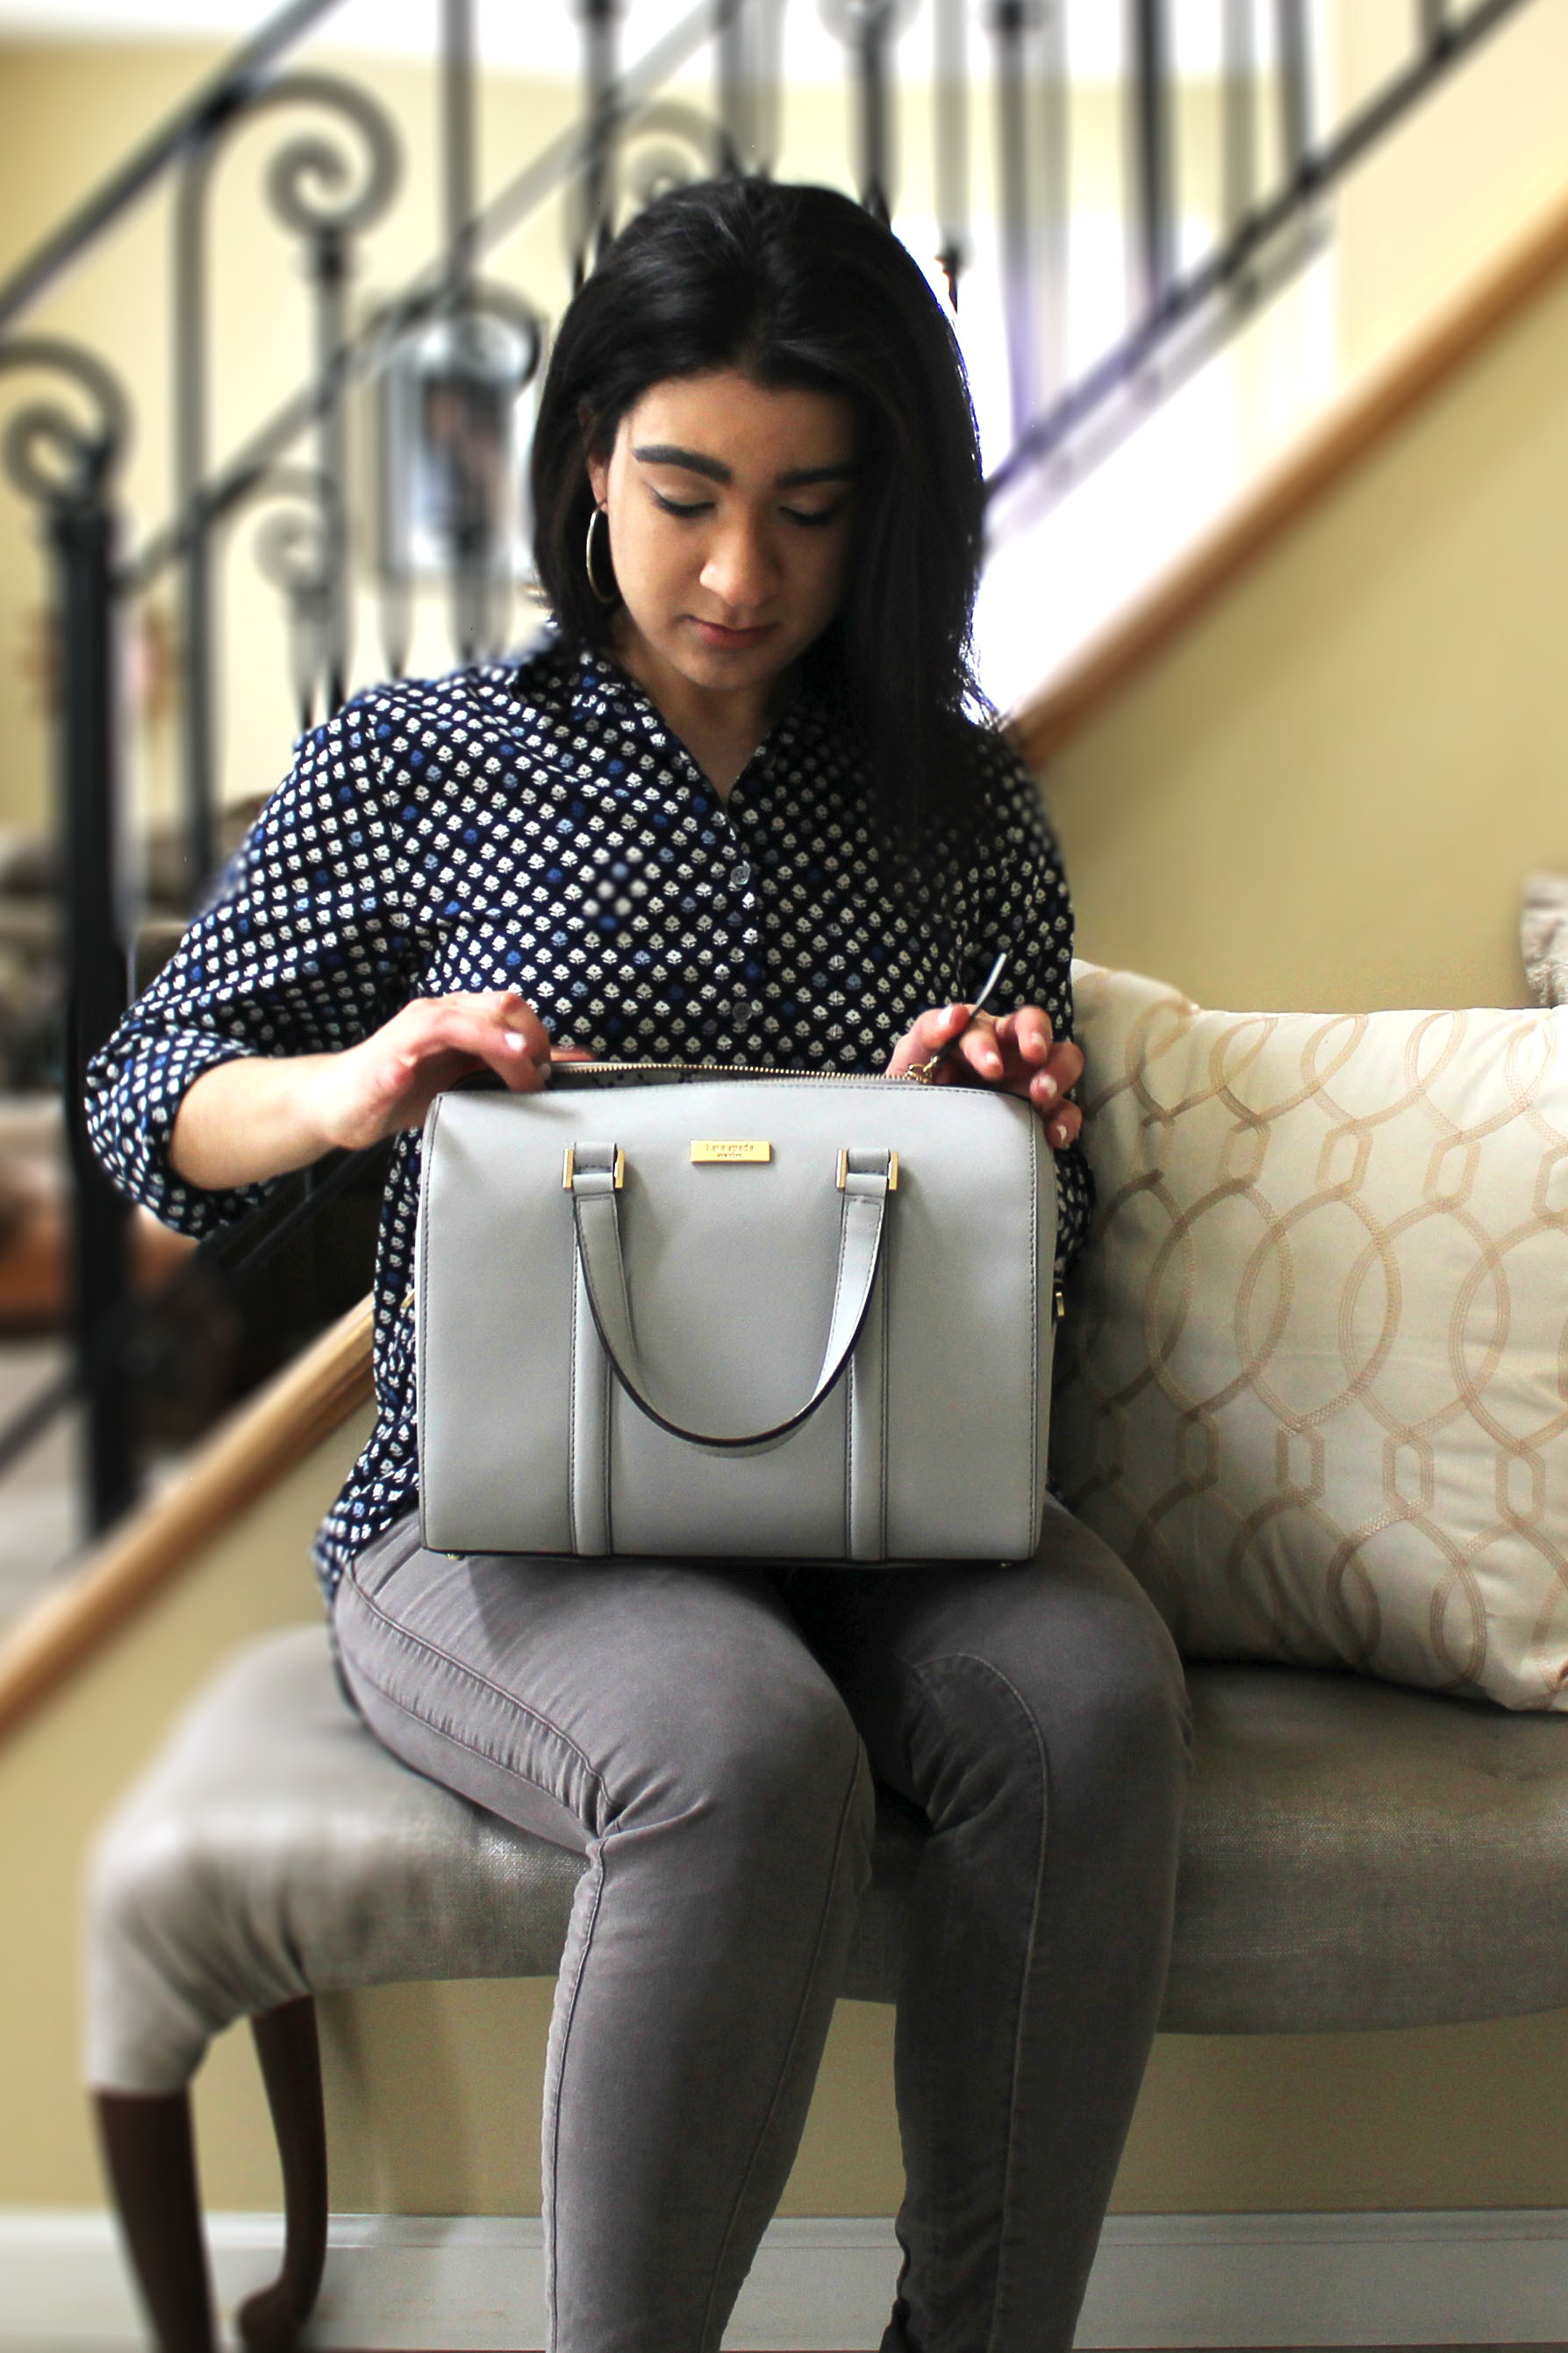 My New Kate Spade Purse Obsession: Ice Gray